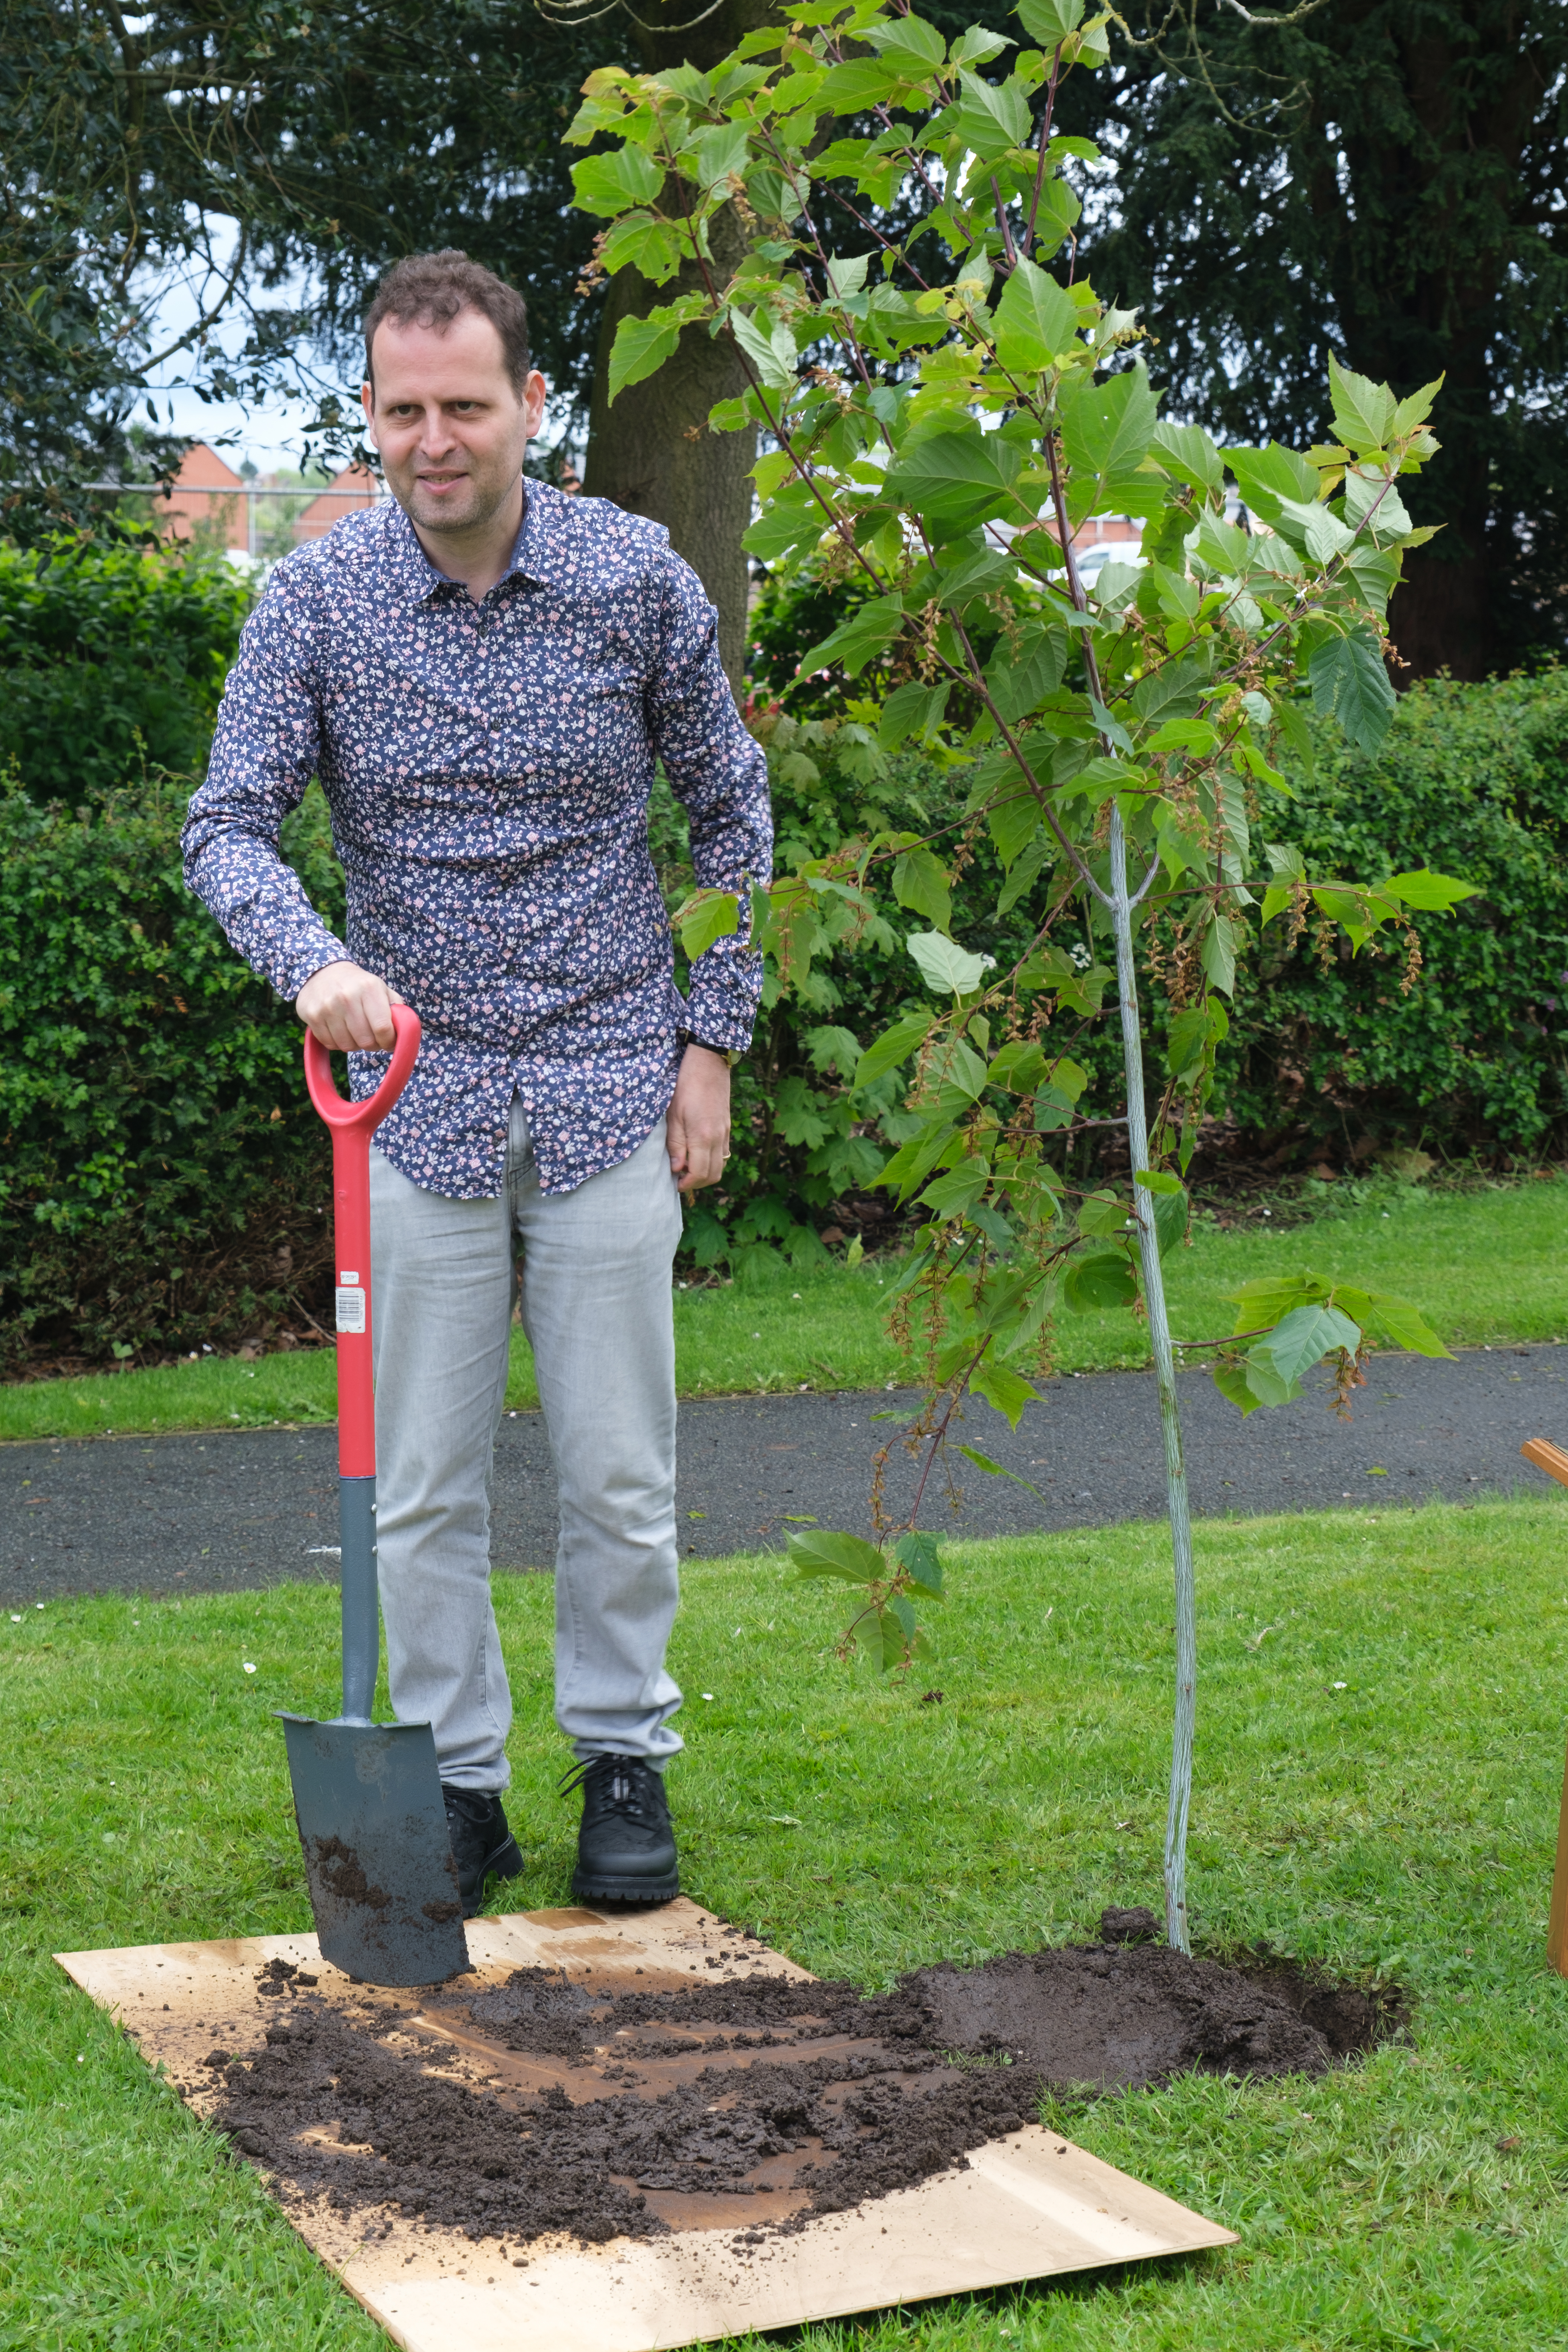 Derbyshire Healthcare hosts Doctors in Distress tree planting event to raise awareness around suicide in healthcare